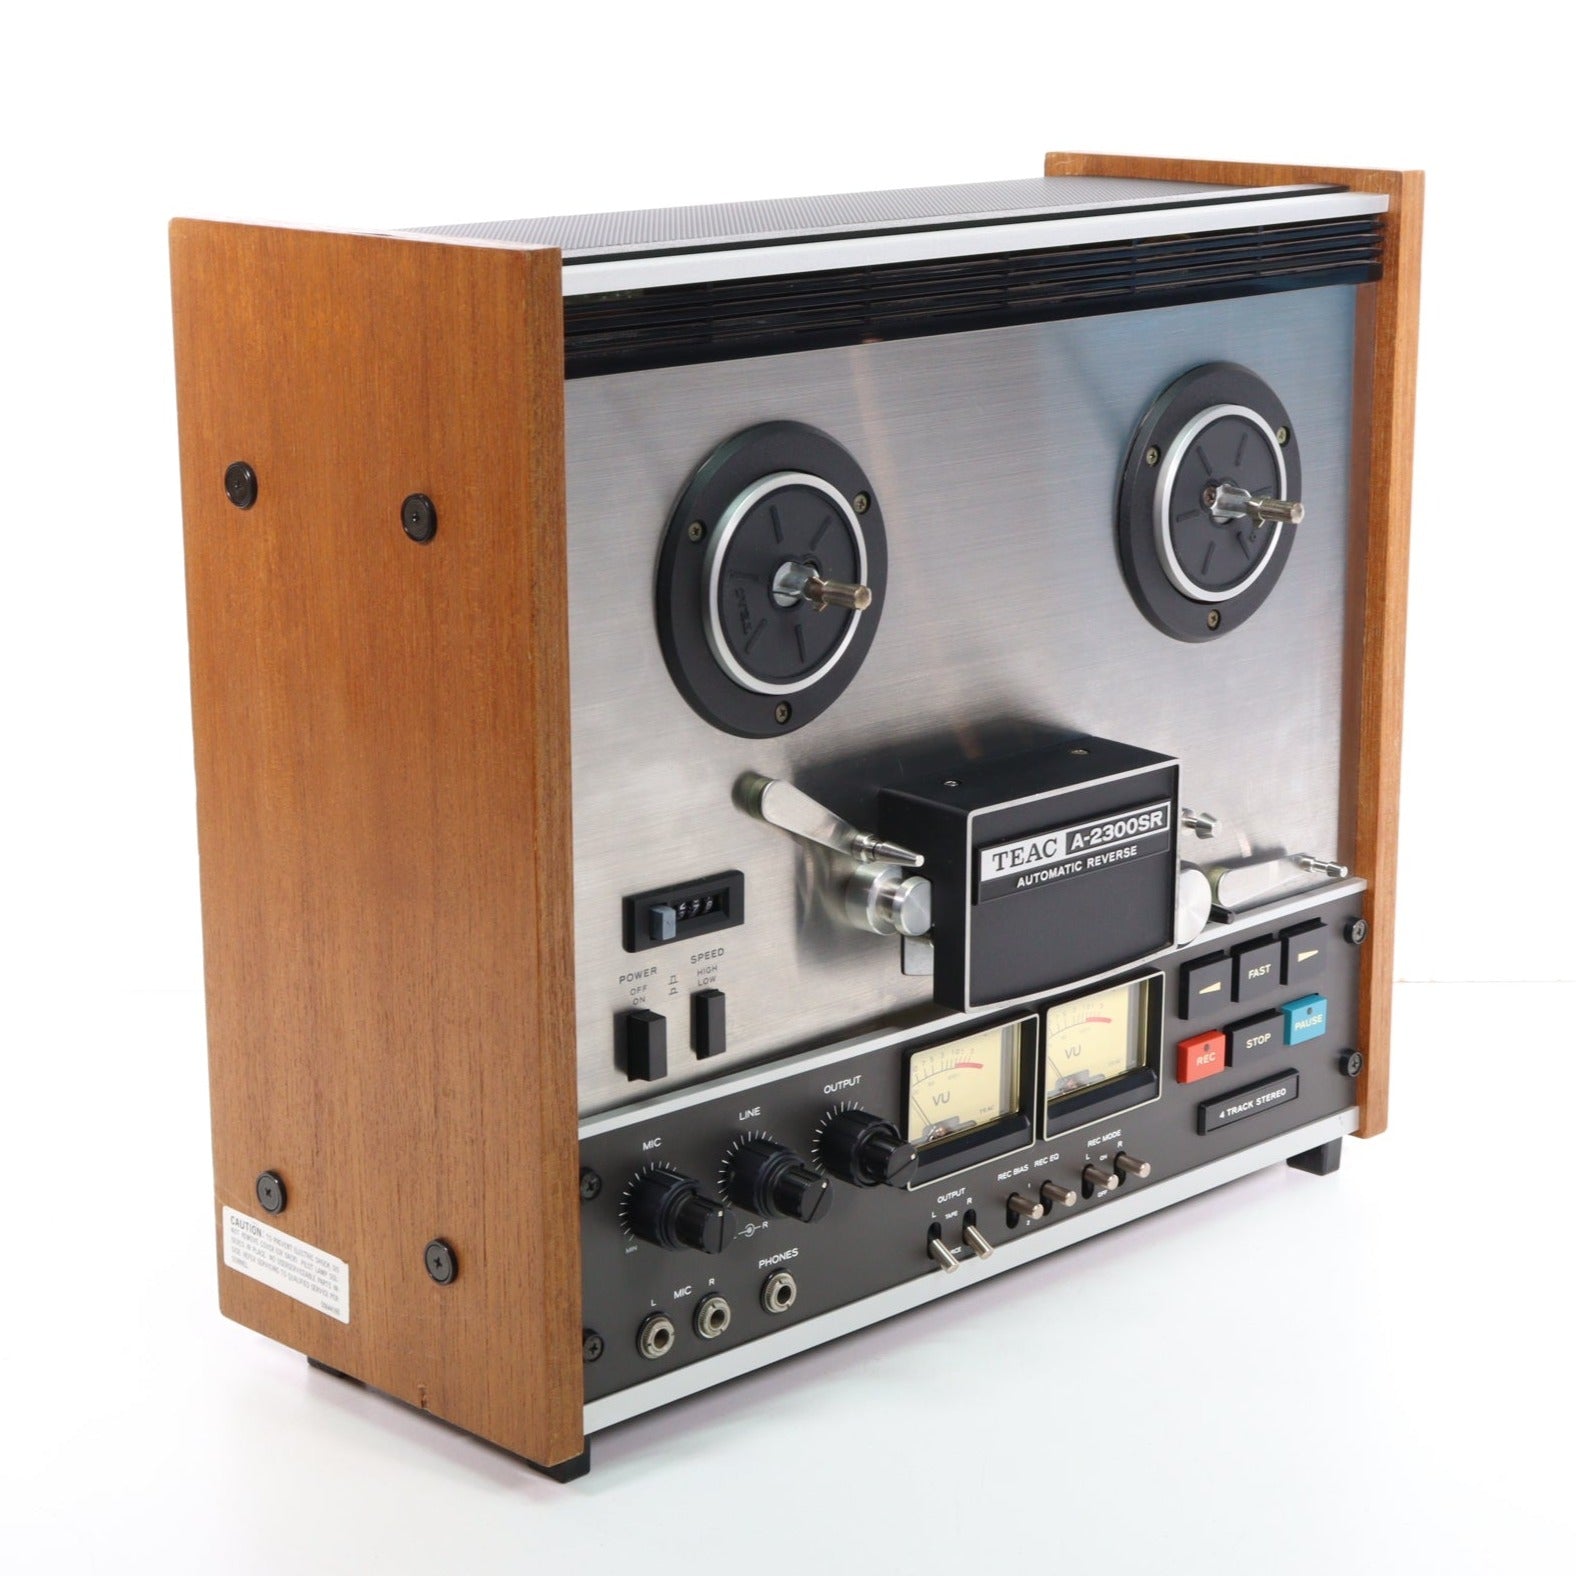 http://spencertified.com/cdn/shop/files/Teac-A-2300SR-Reel-to-Reel-Recorder-Player-Deck-with-Automatic-Reverse-HAS-ISSUES-Reel-to-Reel-Tape-Players-Recorders.jpg?v=1692305699